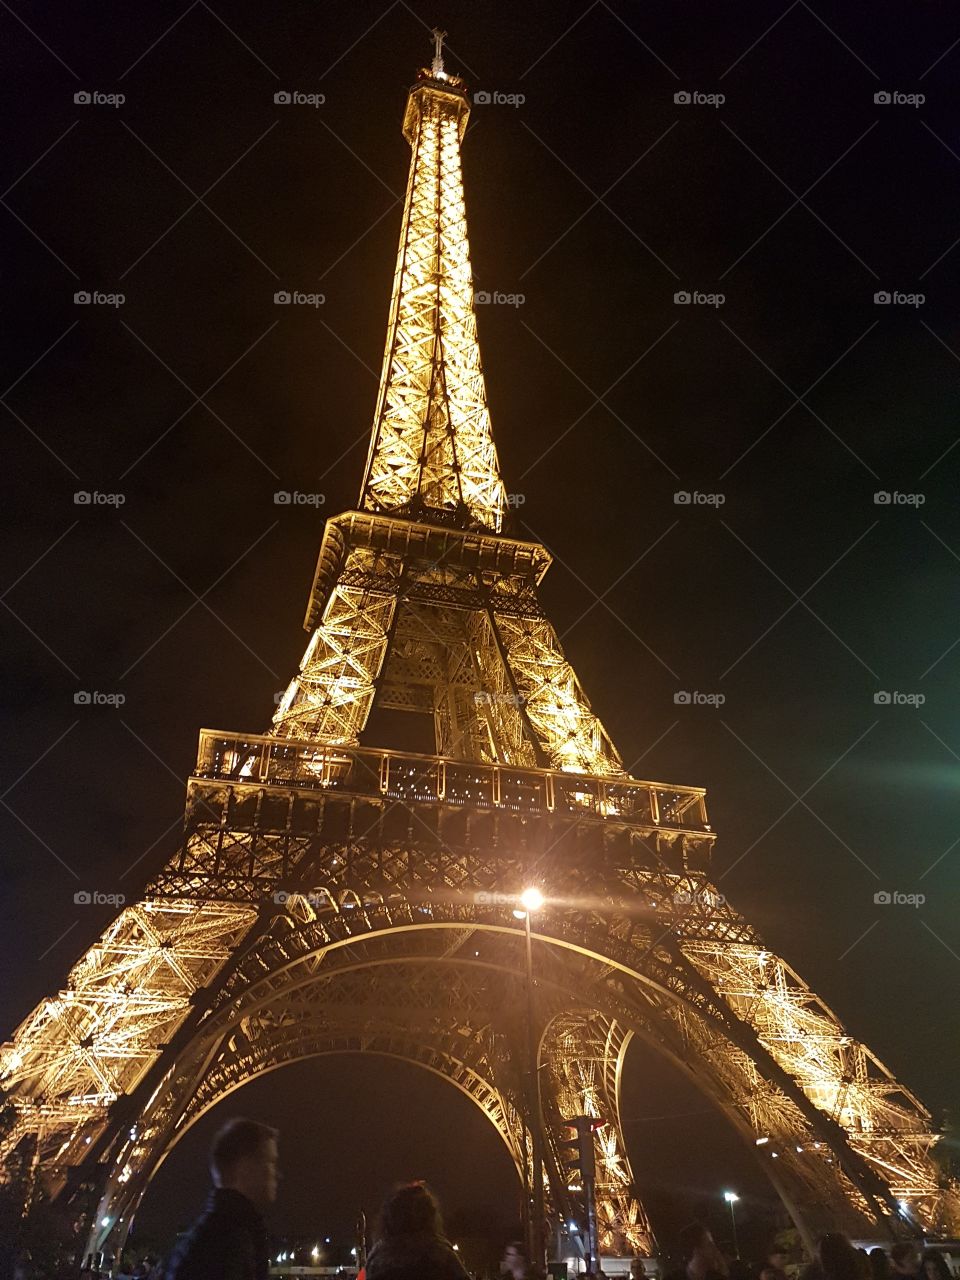 The Eiffel Tower brightly lit at night.